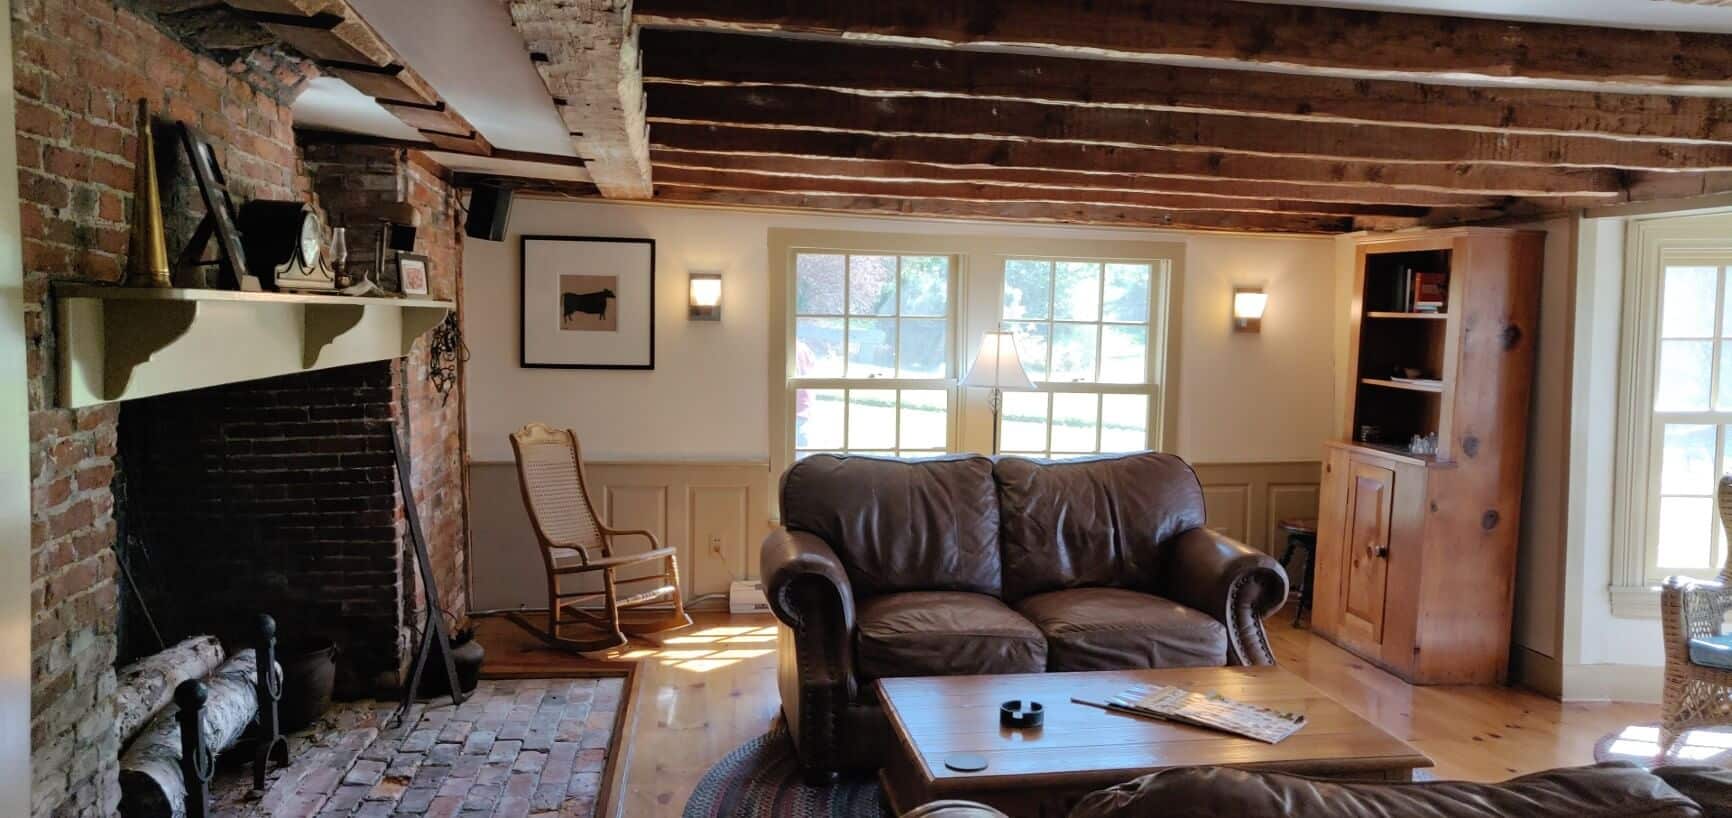 View of room with windows and leather love seats, a large brick fire place and exposed beams on ceiling